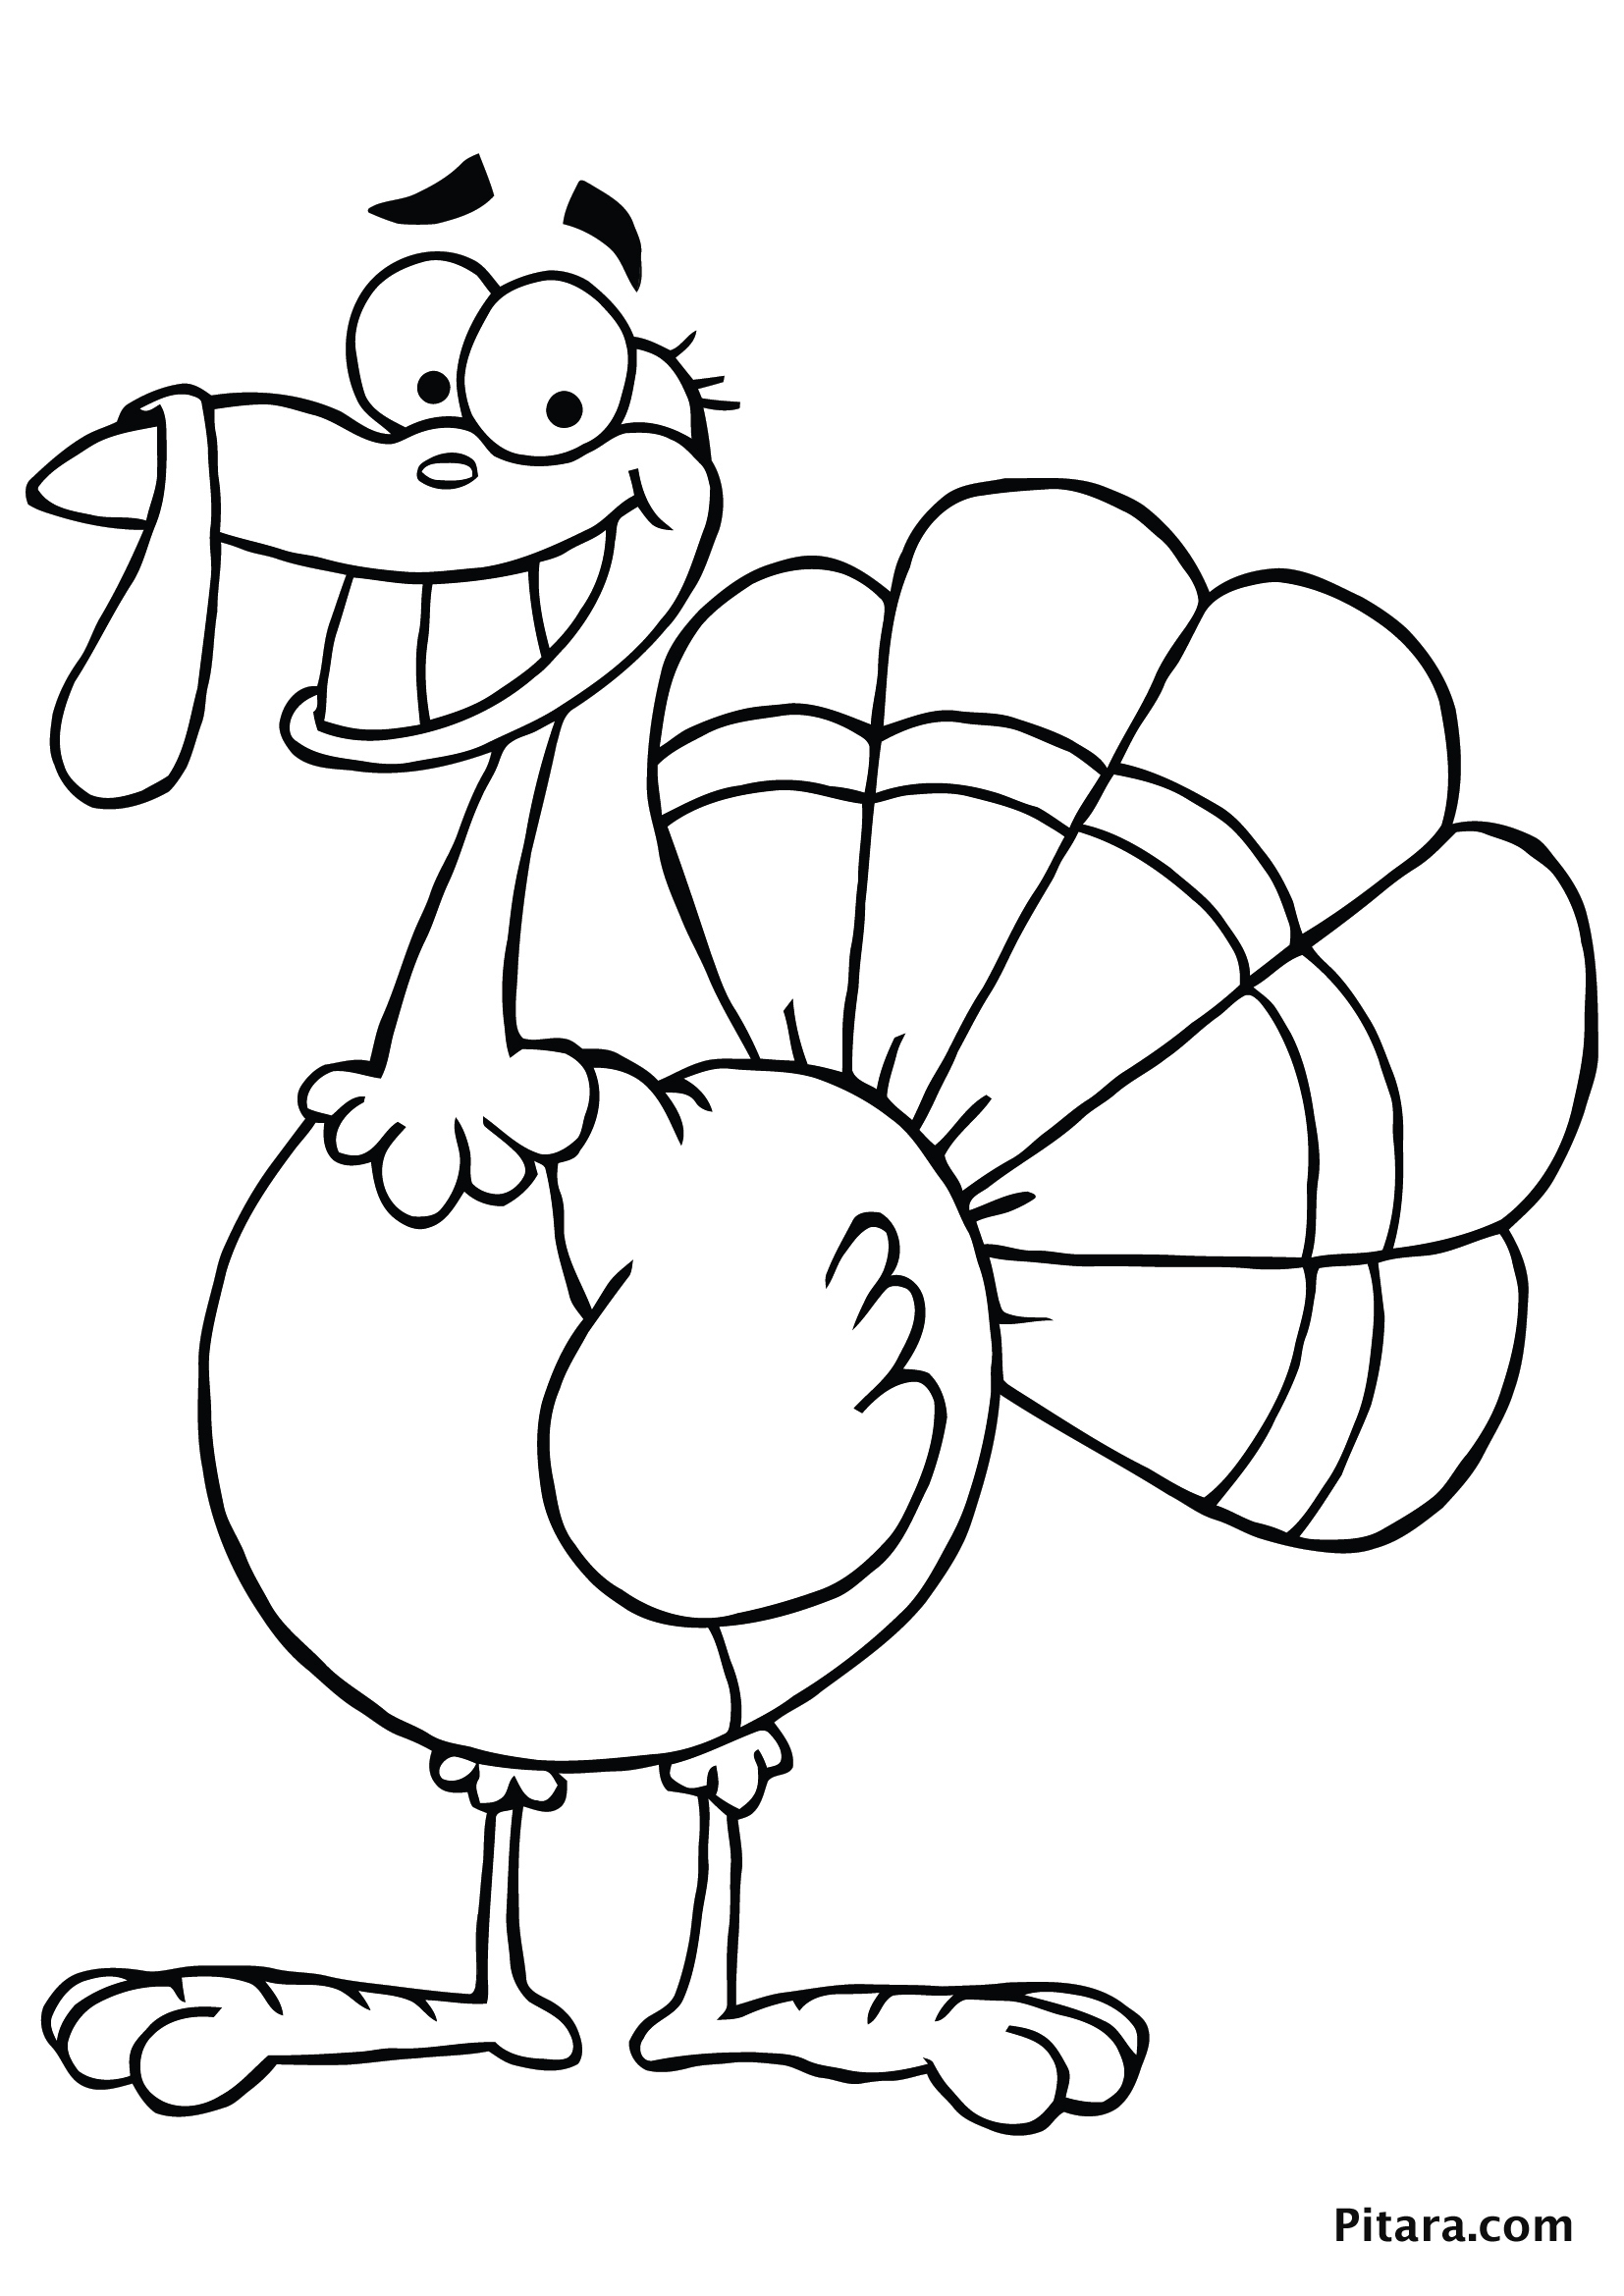 turkey-coloring-pages-for-kids-pitara-kids-network